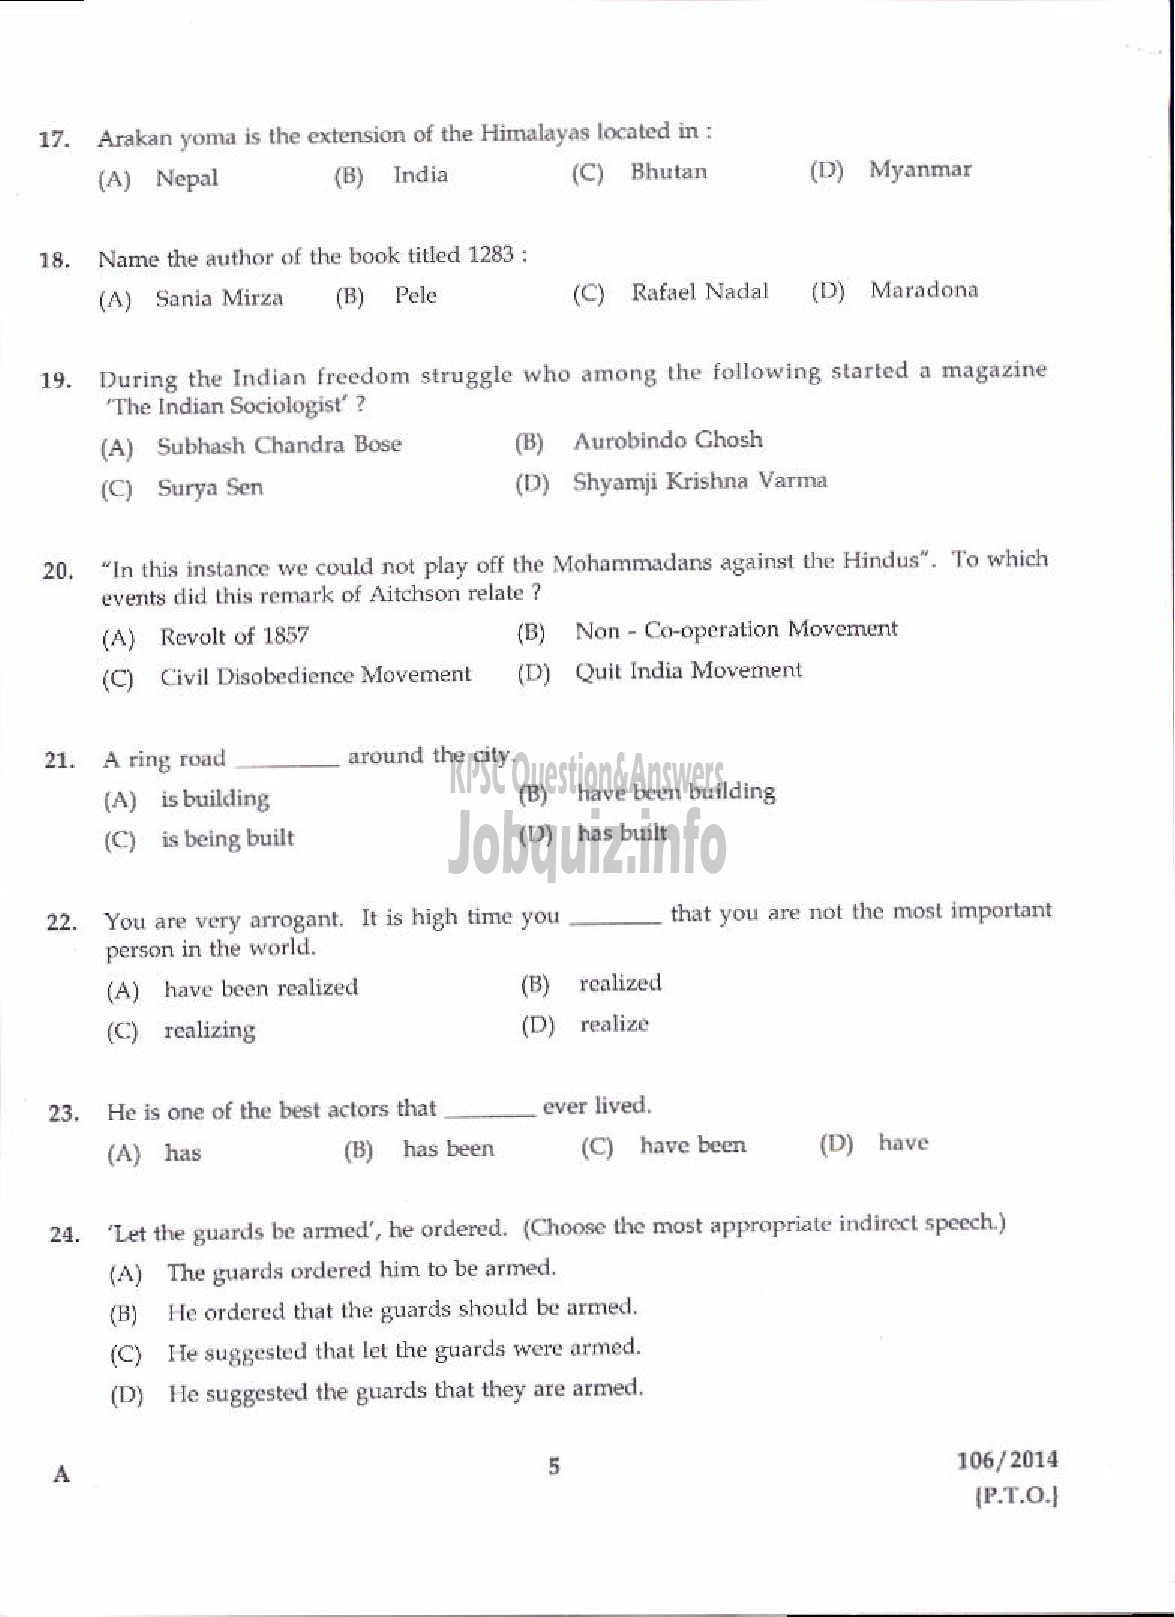 Kerala PSC Question Paper - DIVISIONAL ACCOUNTANT KERALA WATER AUTHORITY PRELIMINARY TEST-3